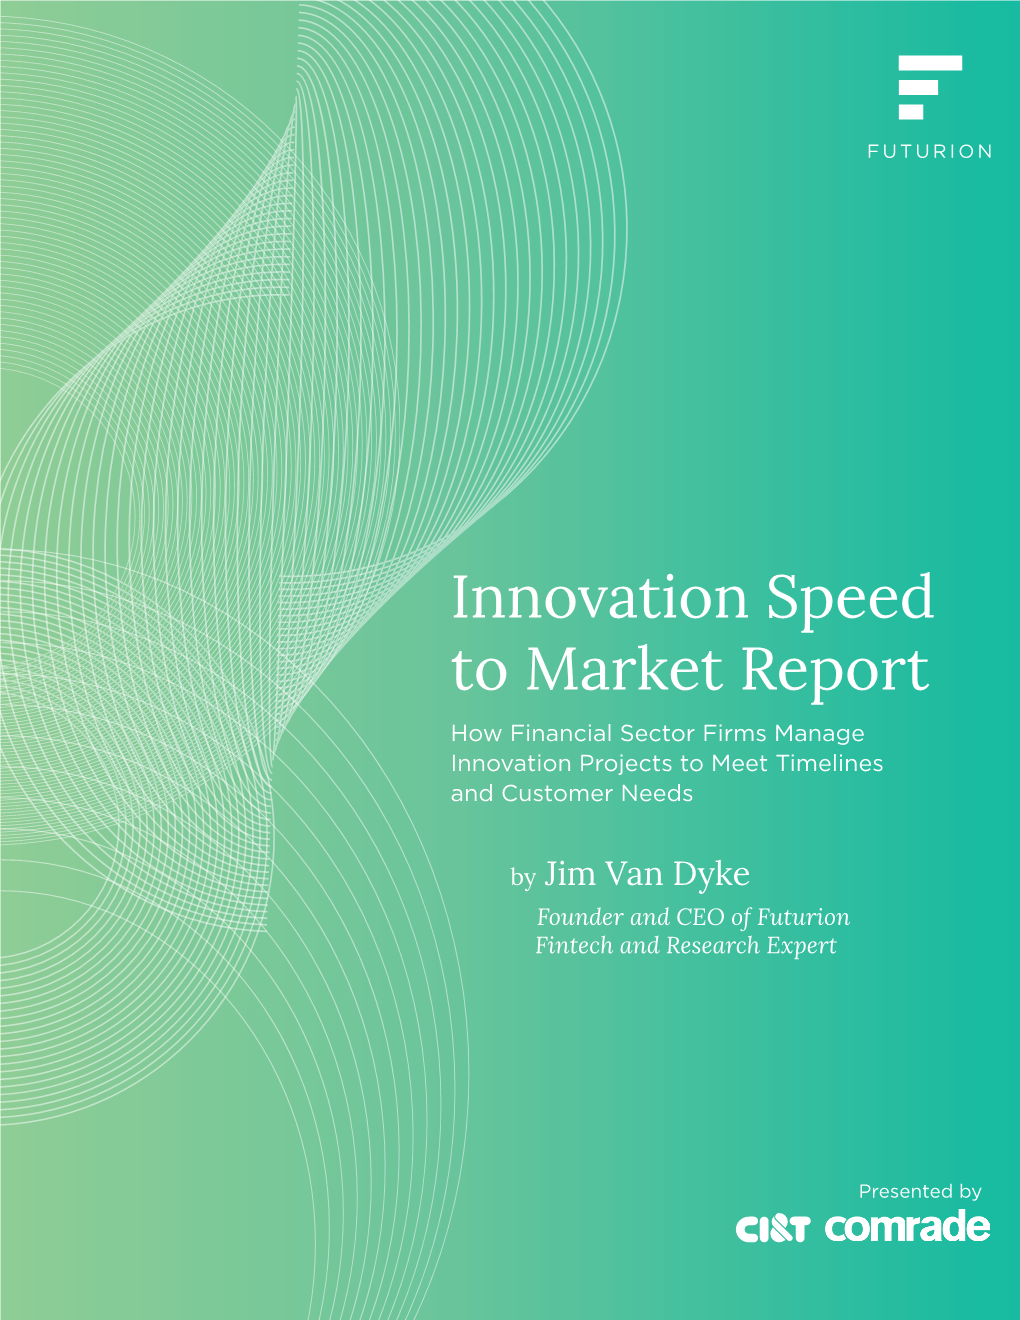 Innovation Speed to Market Report How Financial Sector Firms Manage Innovation Projects to Meet Timelines and Customer Needs